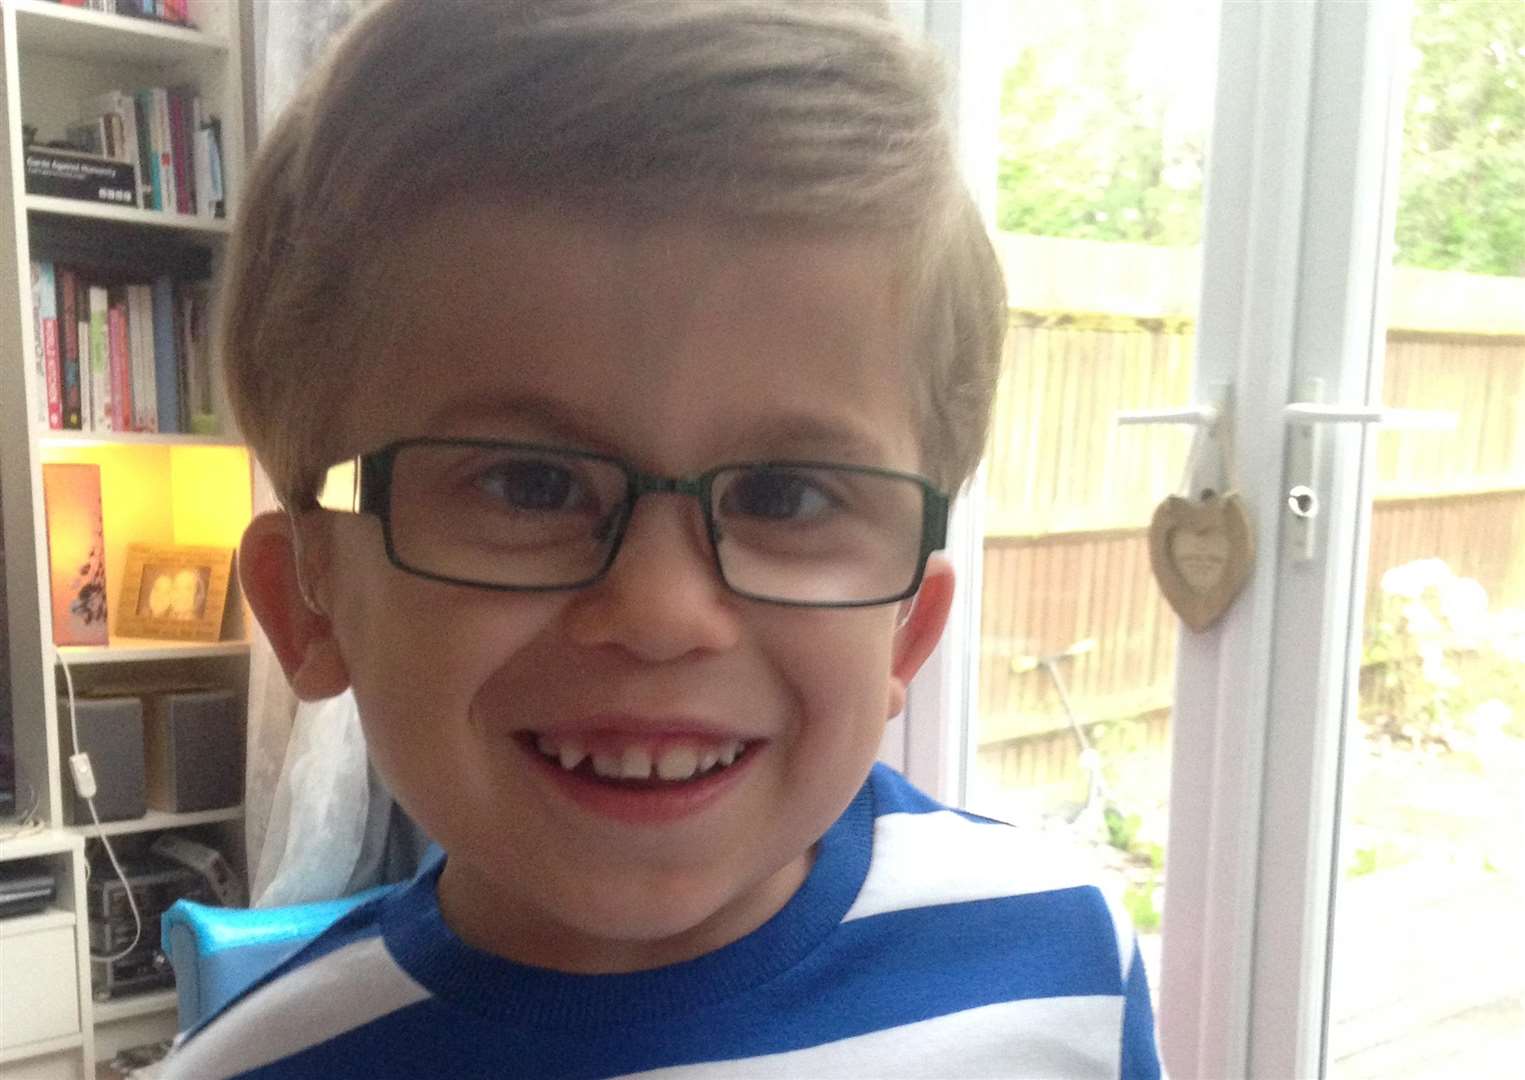 Ethan was diagnosed with MPS shortly before his third birthday